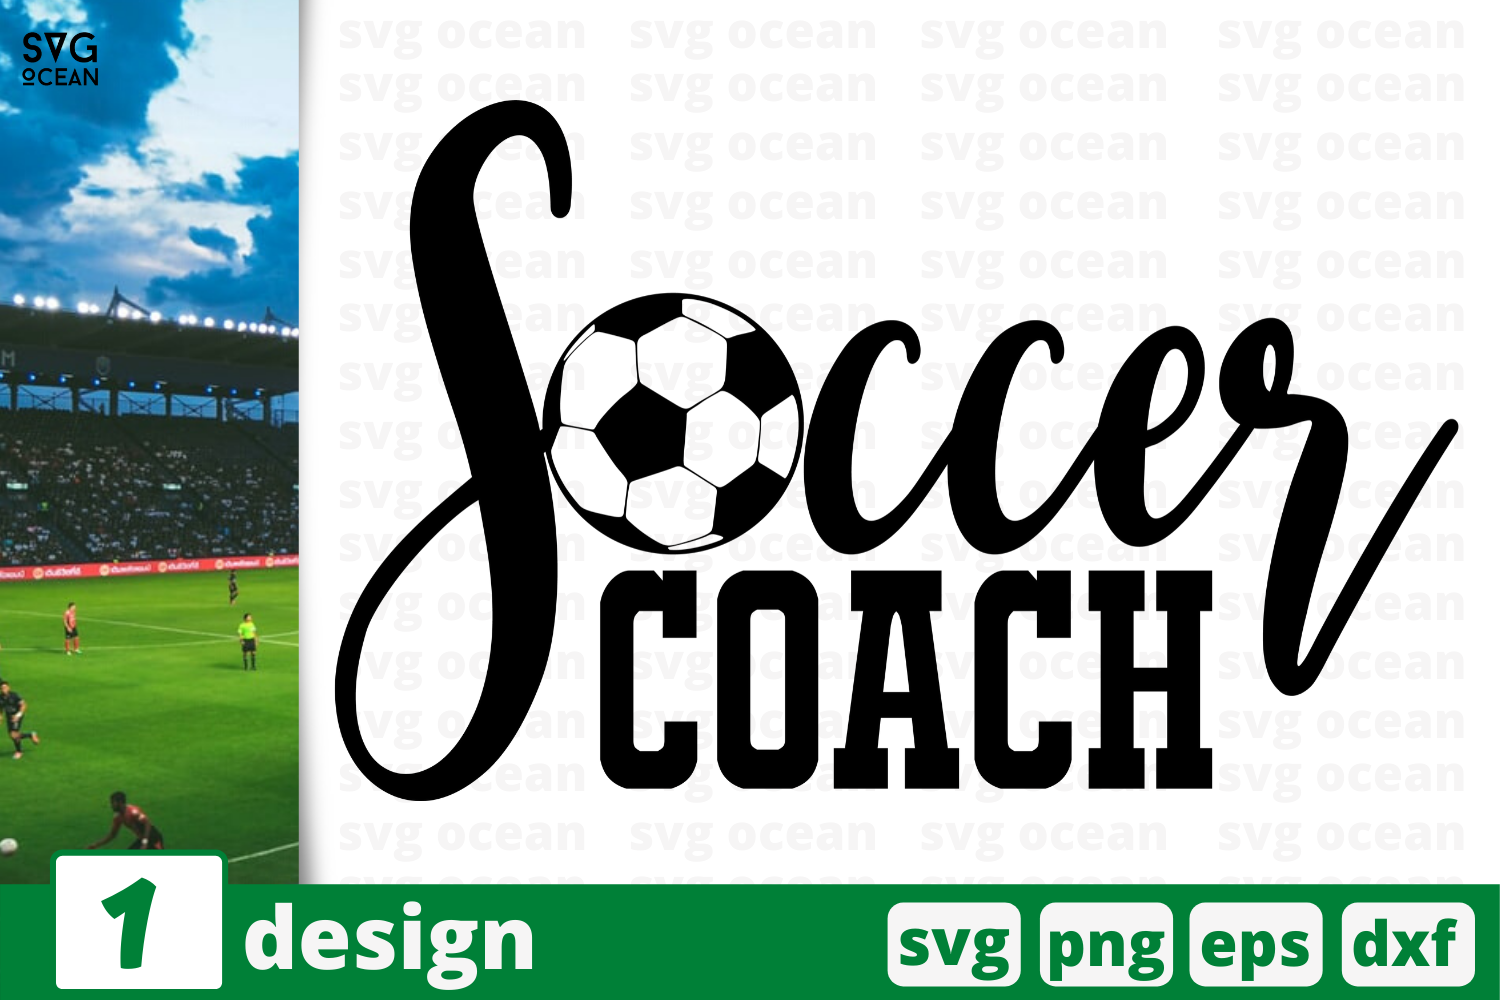 1 SOCCER COACH, soccer quote cricut svg By SvgOcean | TheHungryJPEG